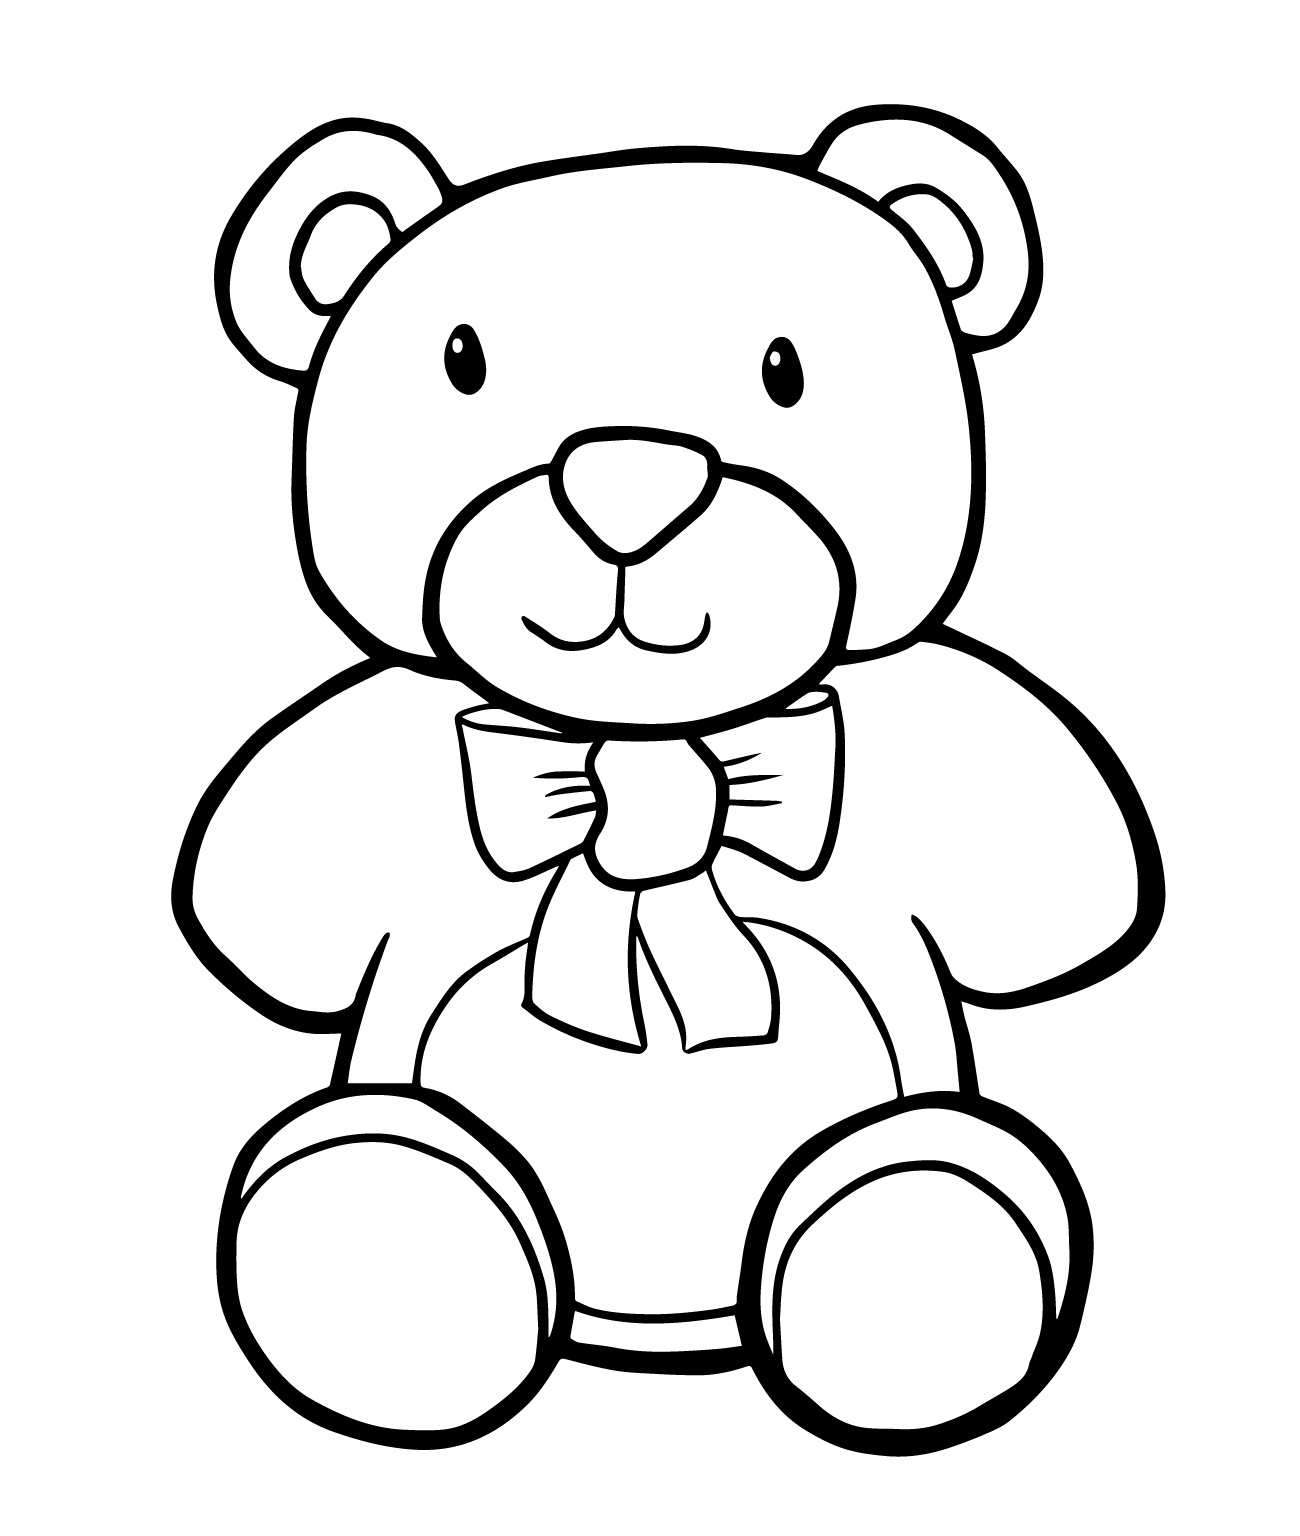 Ria Rabbit Drawing For Kids | Learn To Draw A Teddy Bear